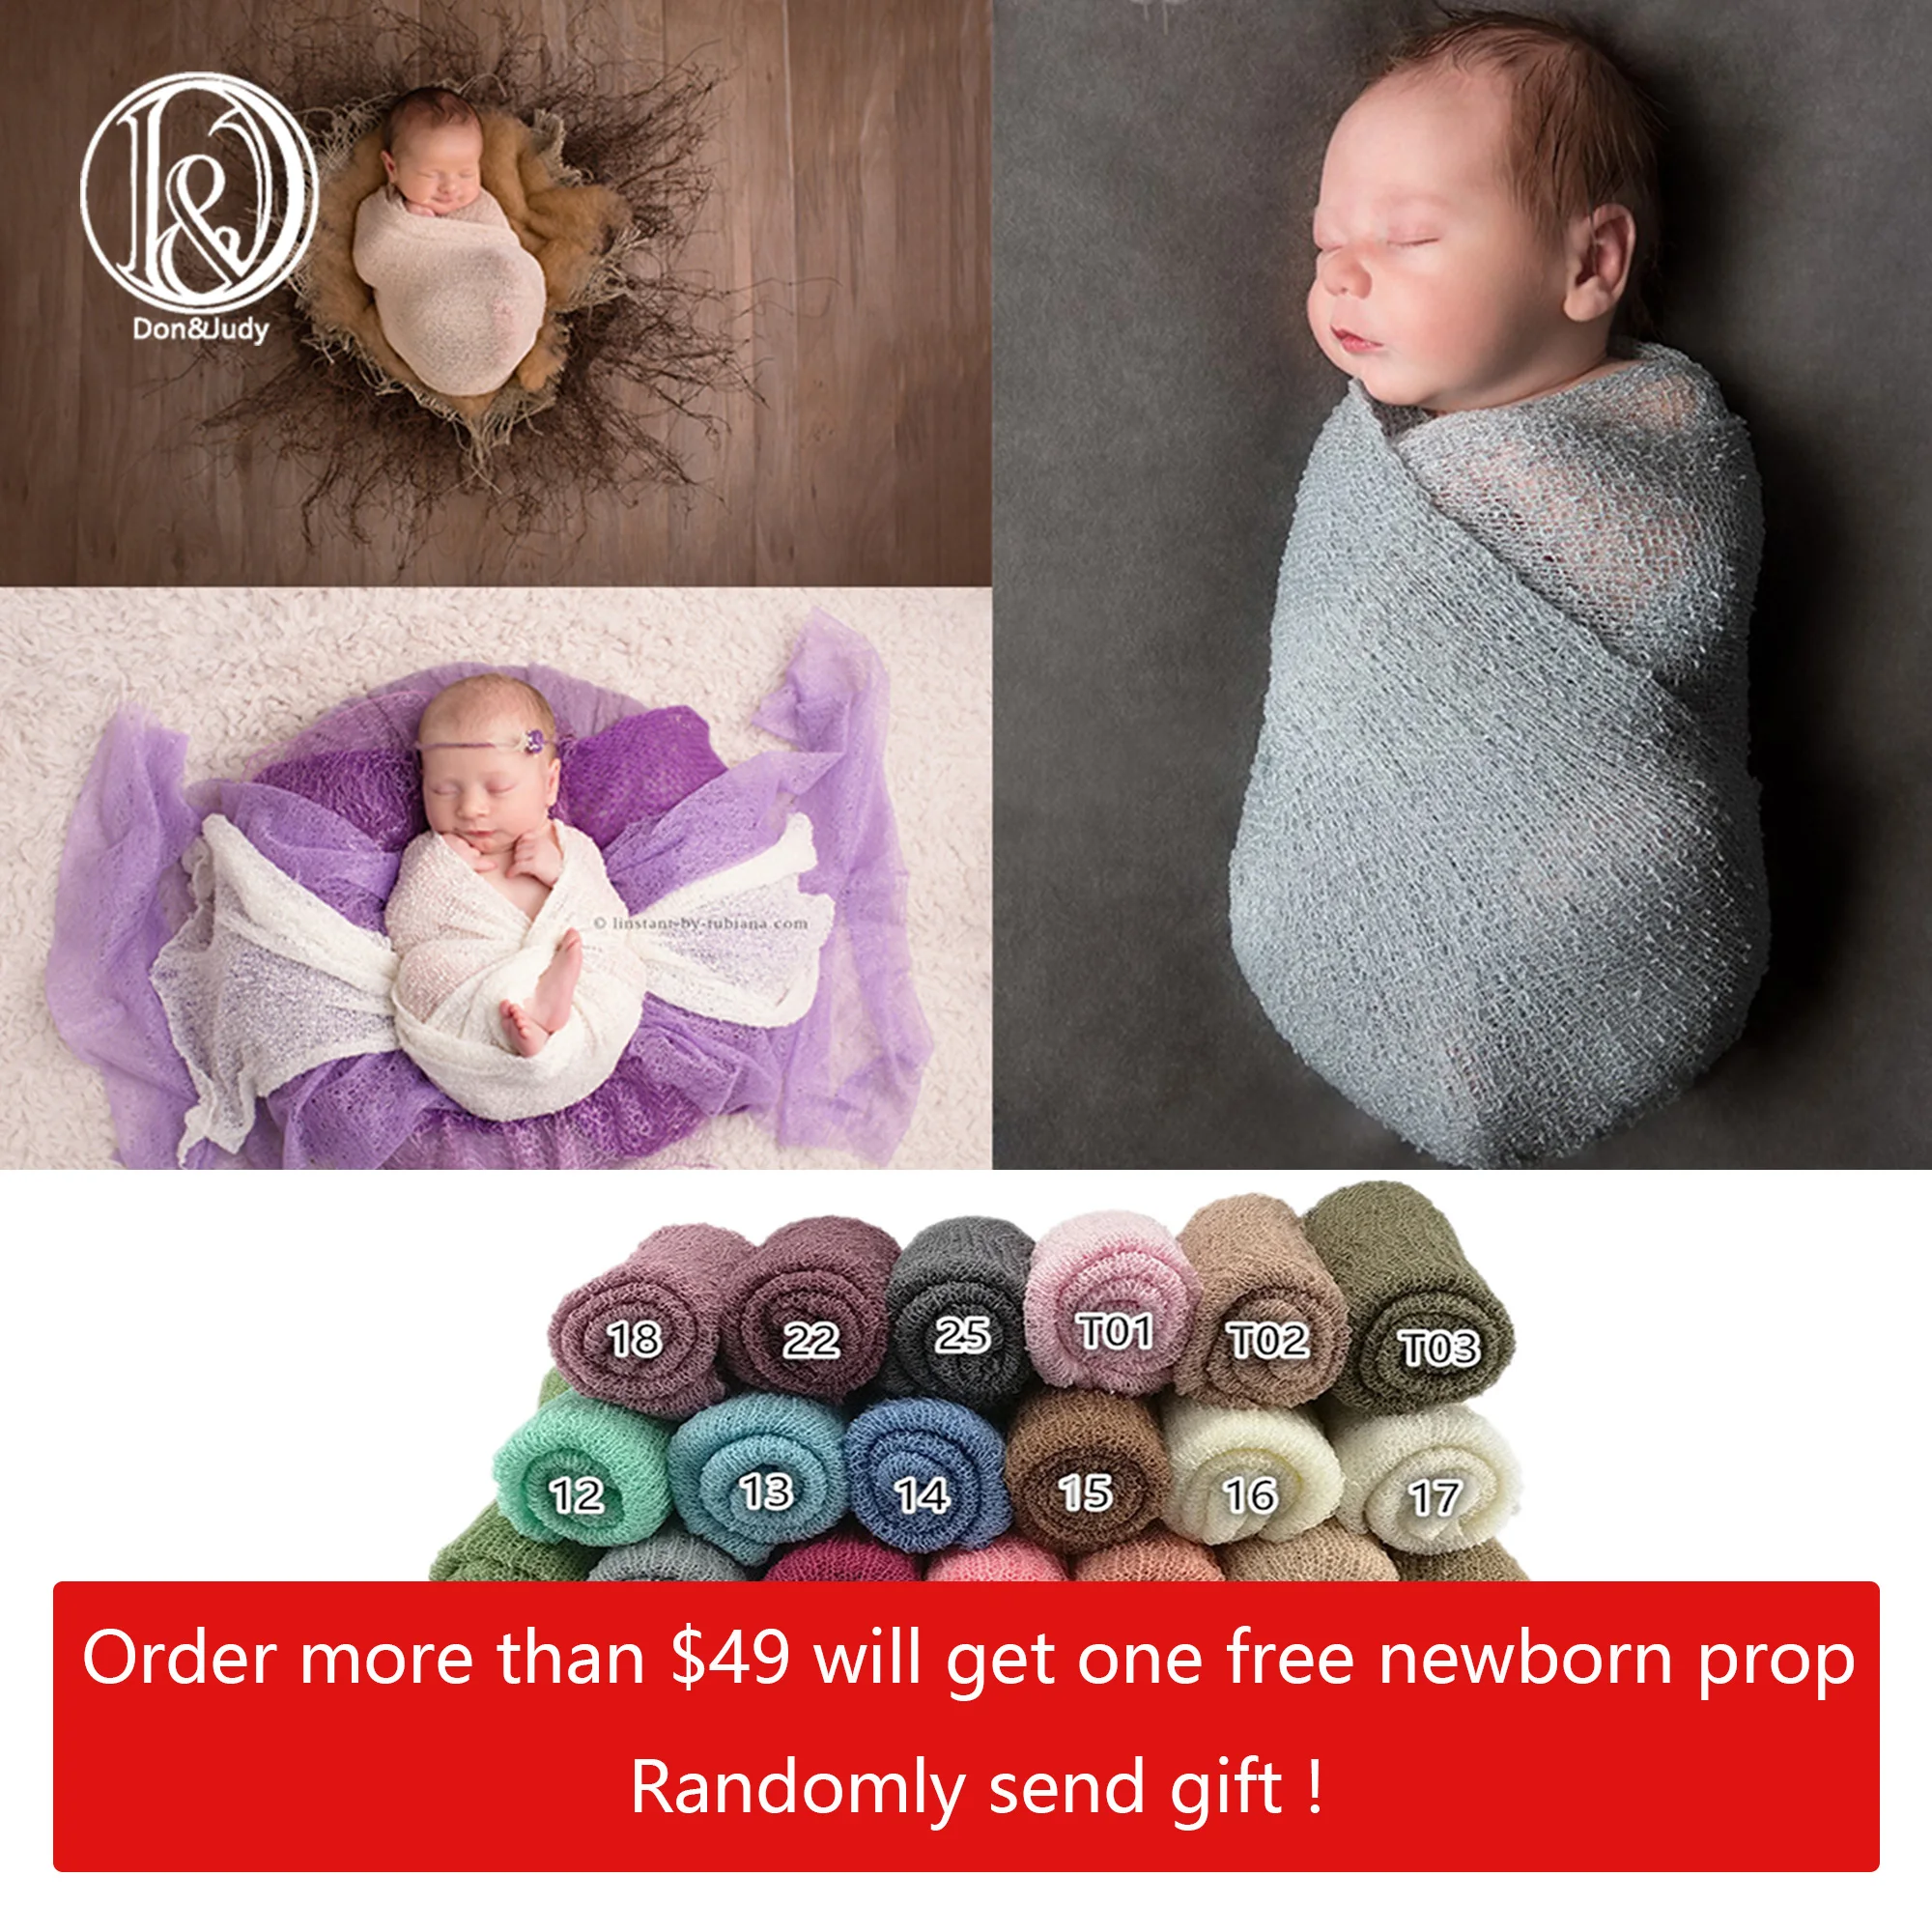 Soft Knit Stretchy Wraps Swaddle For Newborn Baby Photography Props Kids Receiving Blankets Cloth Accessories For Photo Shooting soft knit stretchy wraps swaddle for newborn baby photography props kids receiving blankets cloth accessories for photo shooting